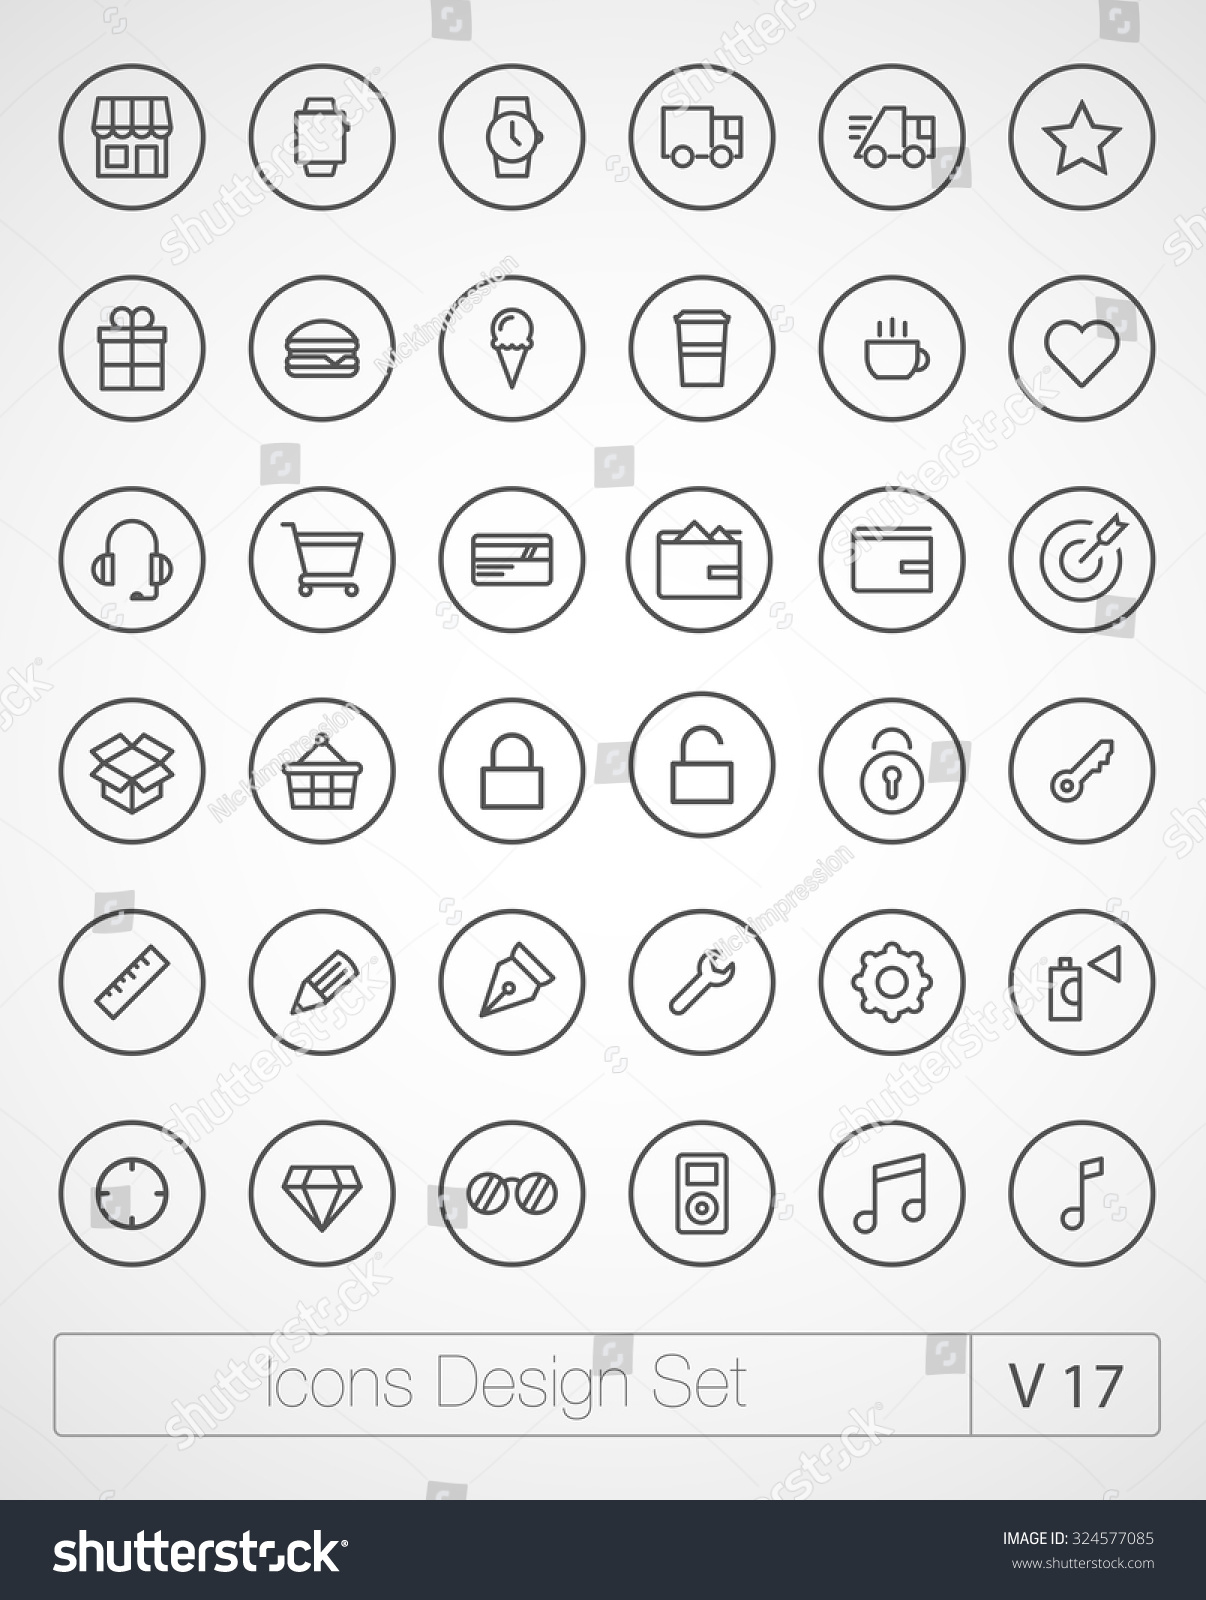 Vector Thin Icons Design Set. Modern Simple Line Icons. Ultra Thin ...